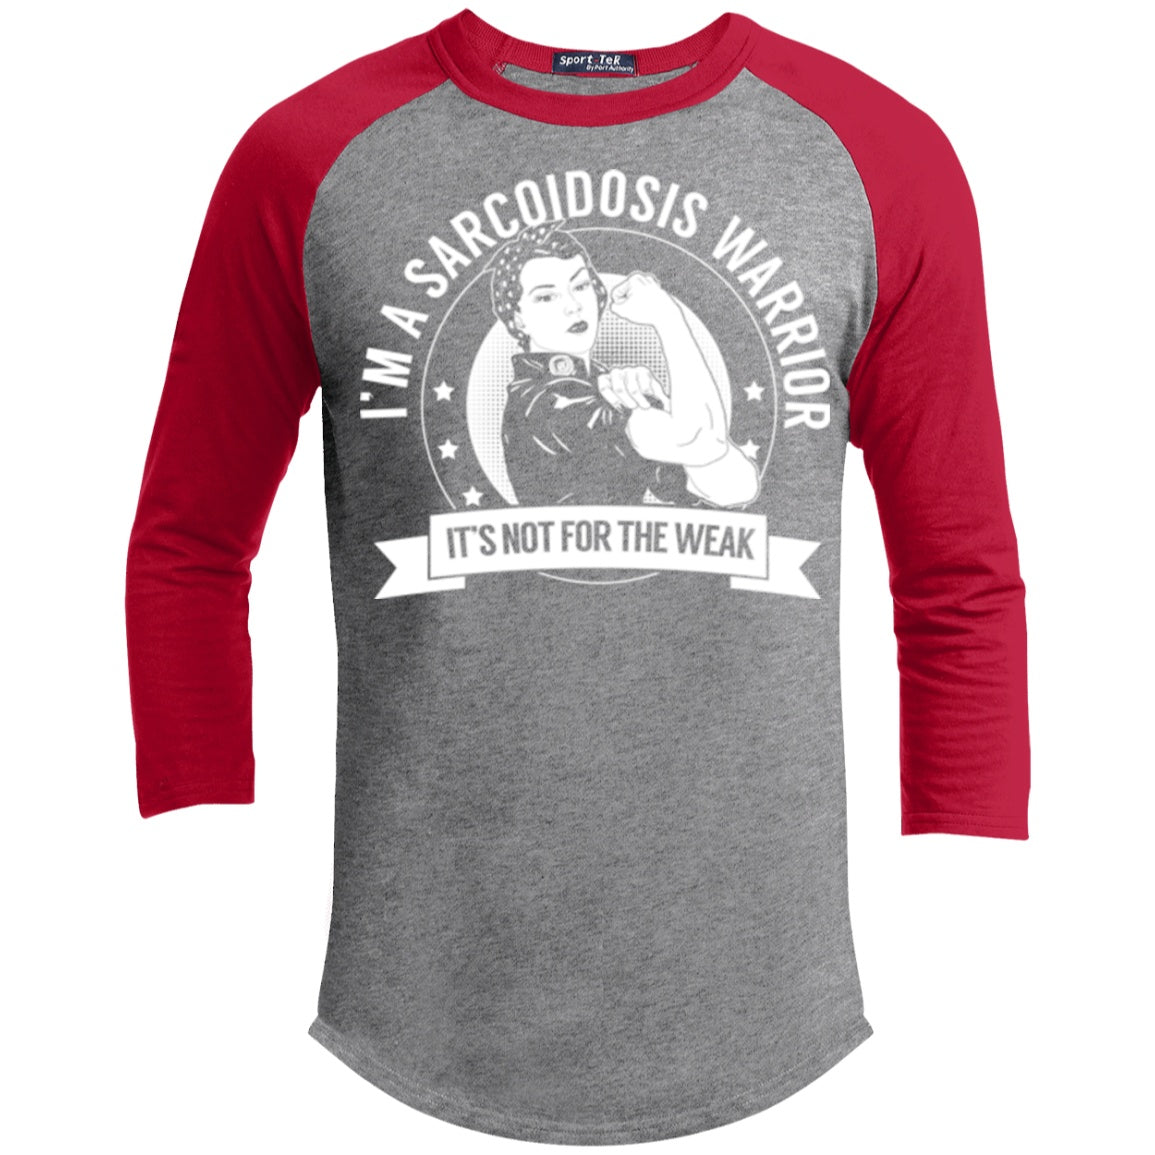 Sarcoidosis Warrior Not For The Weak Baseball Shirt - The Unchargeables